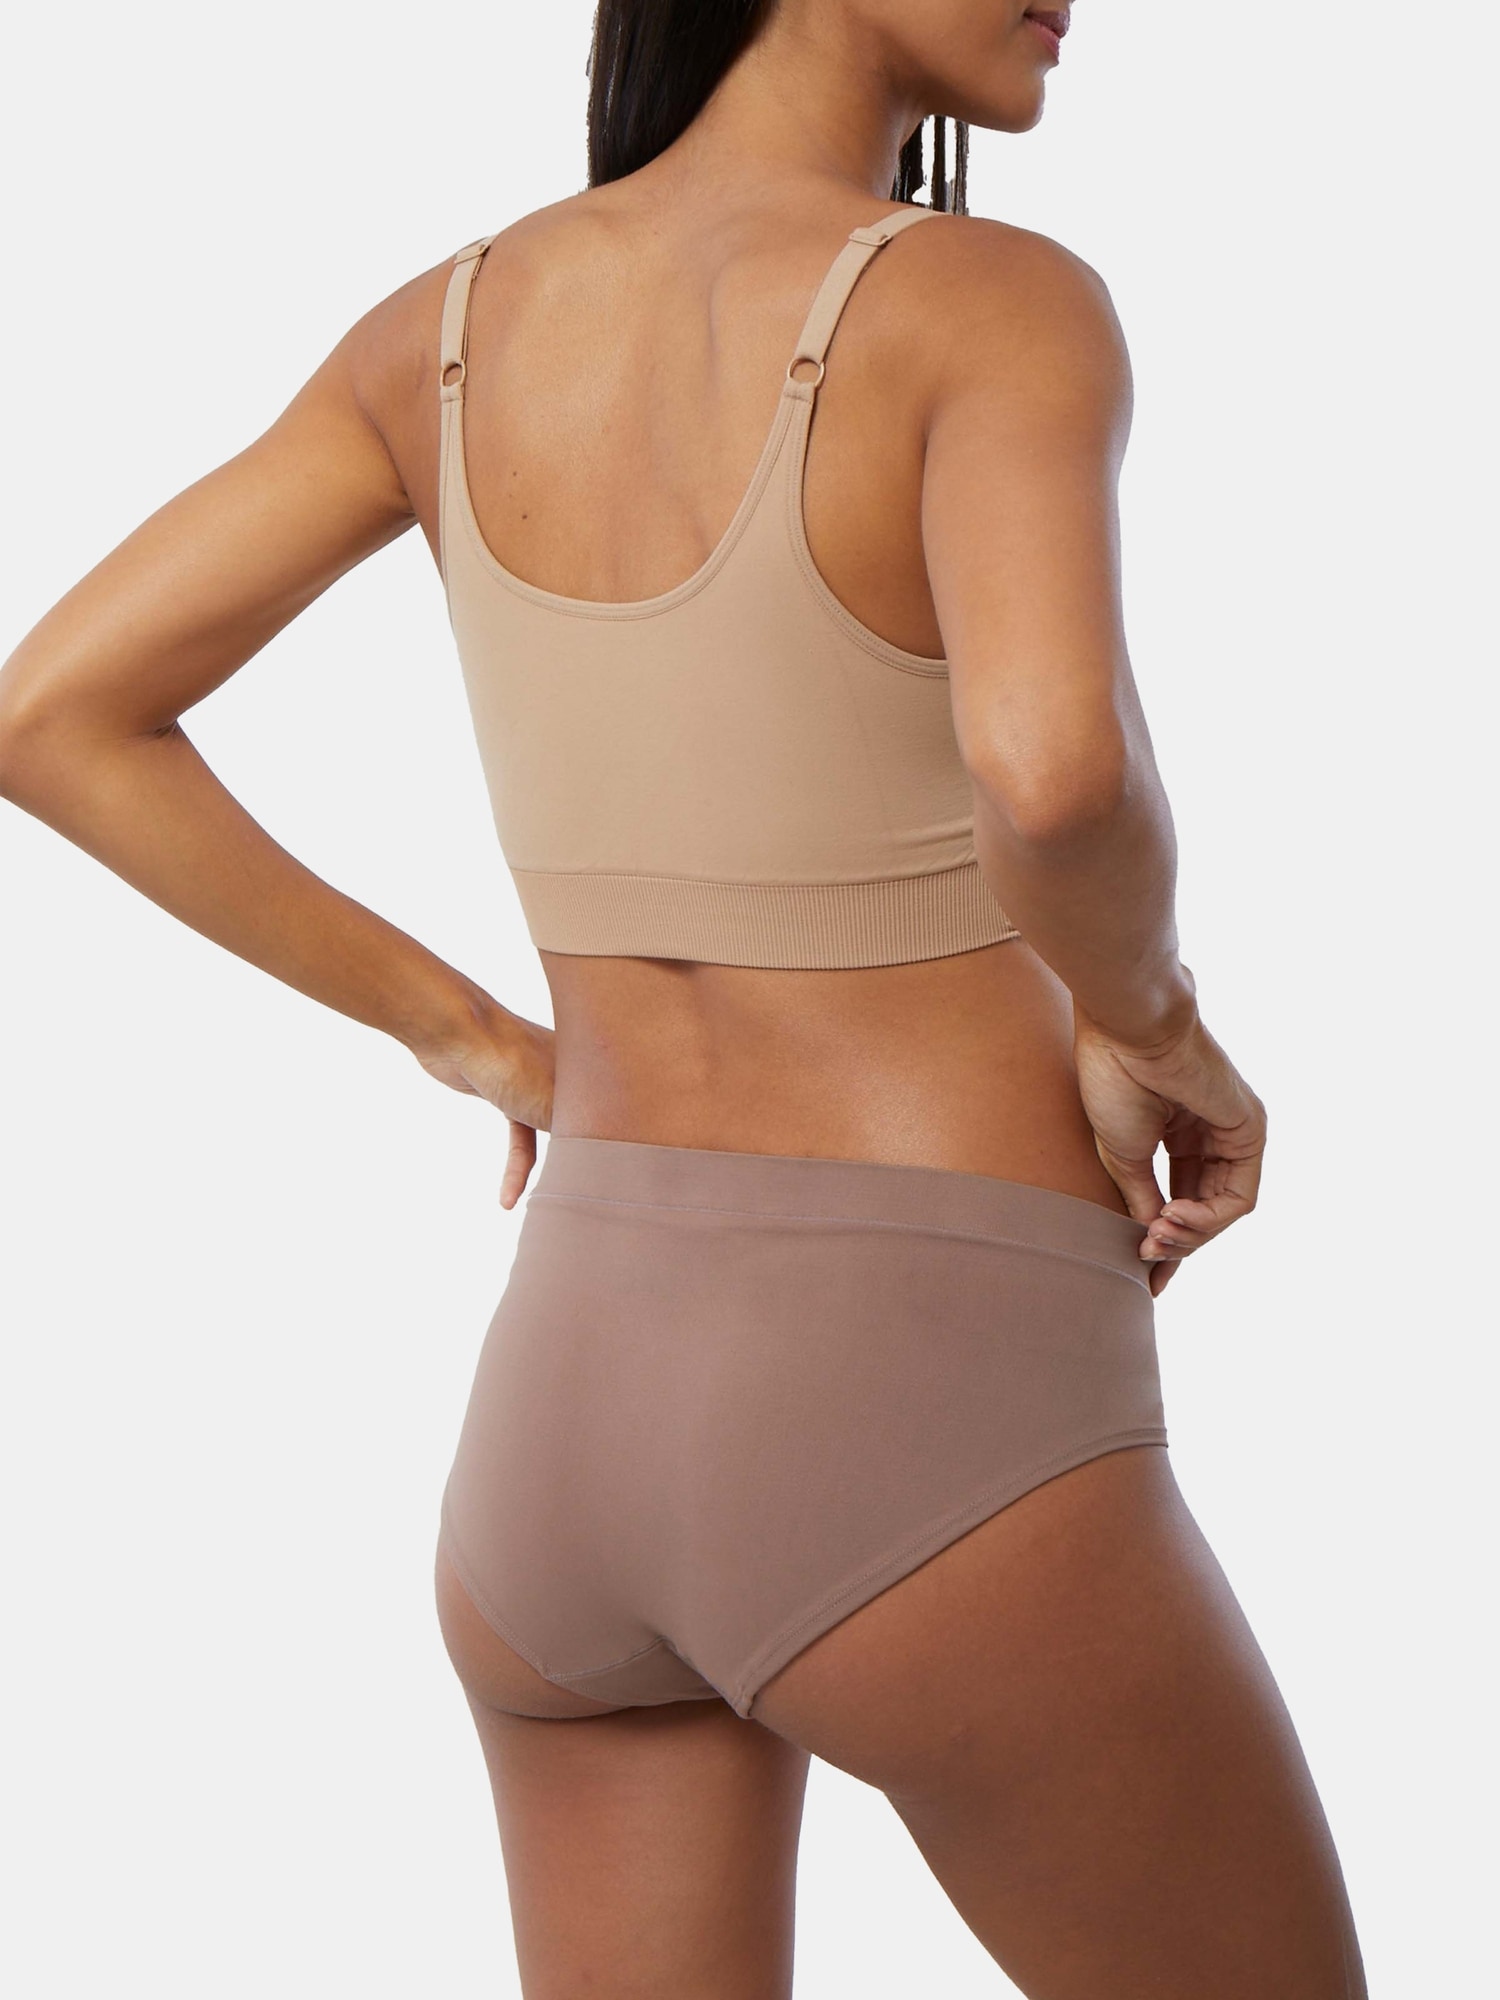 Maternity Story Lightweight Underwear - Everyday Wear - Mid Waist Seamless  Underwear for Women - Buttery Soft - Full Coverage [Summer Pastels, Medium,  3 Pack] at  Women's Clothing store